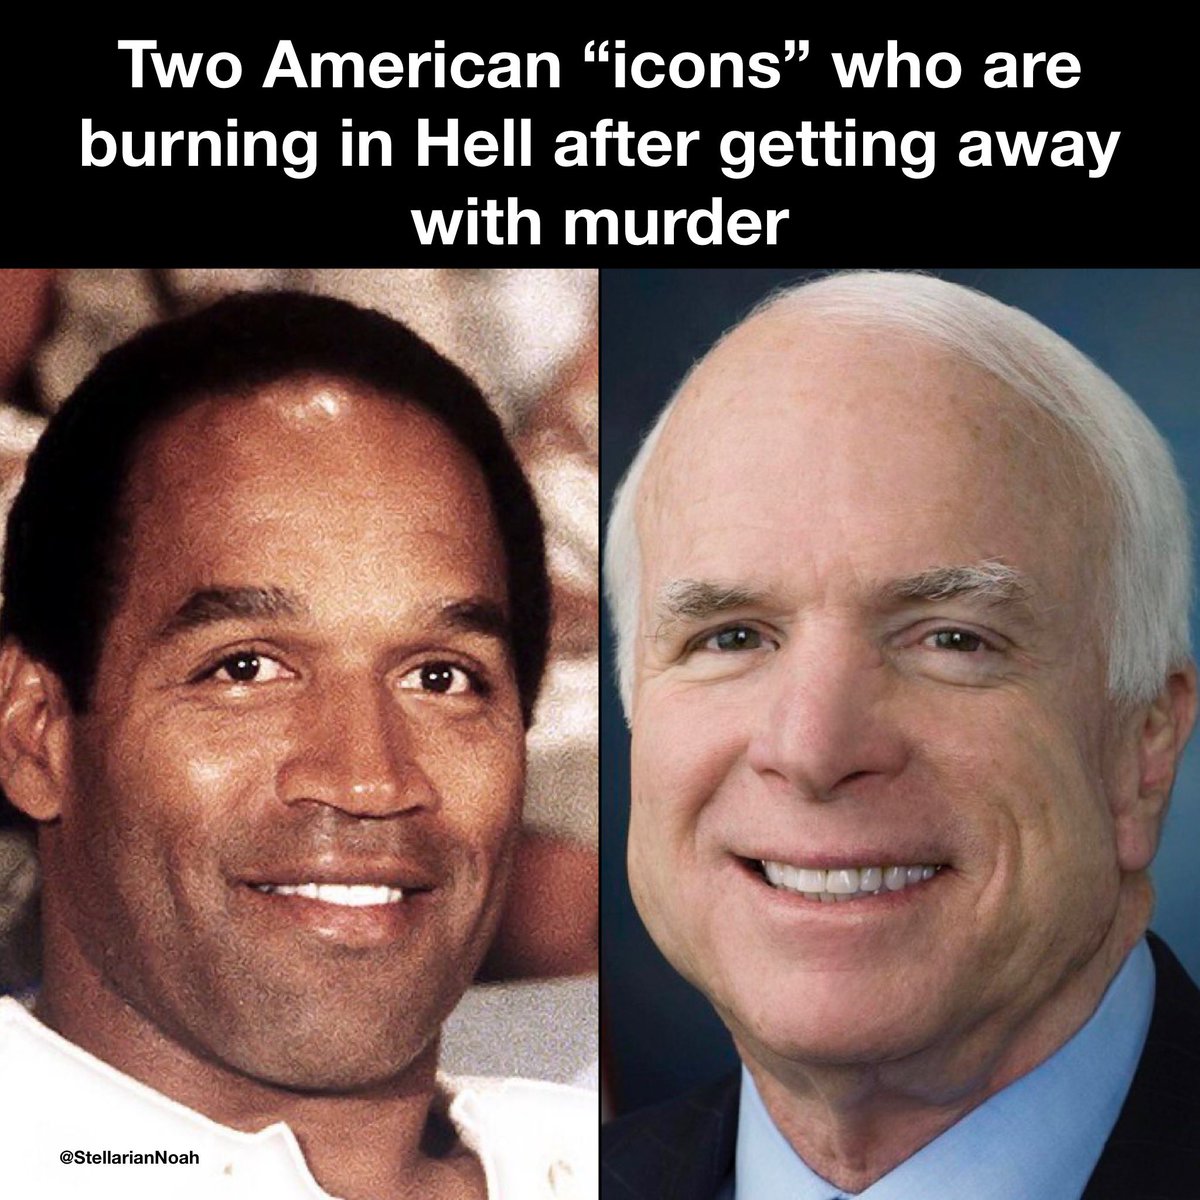 All the McCain dorks can kiss my butt. OJ and John McCain were both beneficiaries of a Ruling Class favoring injustice system. #OJSimpson #JohnMcCain